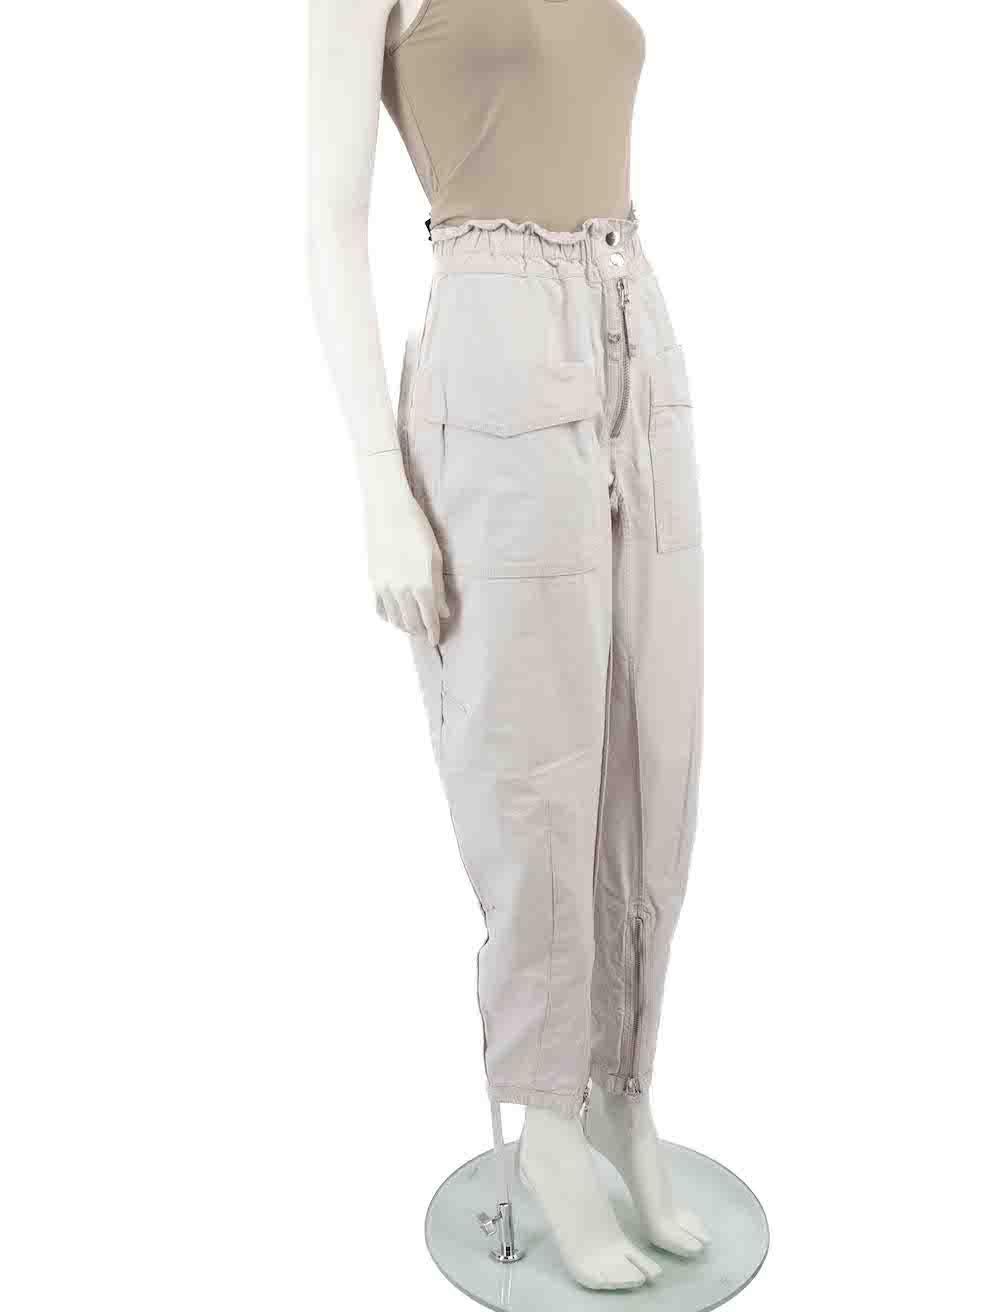 CONDITION is Very good. Minimal wear to trousers is evident. Minimal wear to the centre-front where the bartack has been repaired on this used Isabel Marant Etoile designer resale item.
 
 Details
 Grey
 Cotton
 Tapered trousers
 High rise
